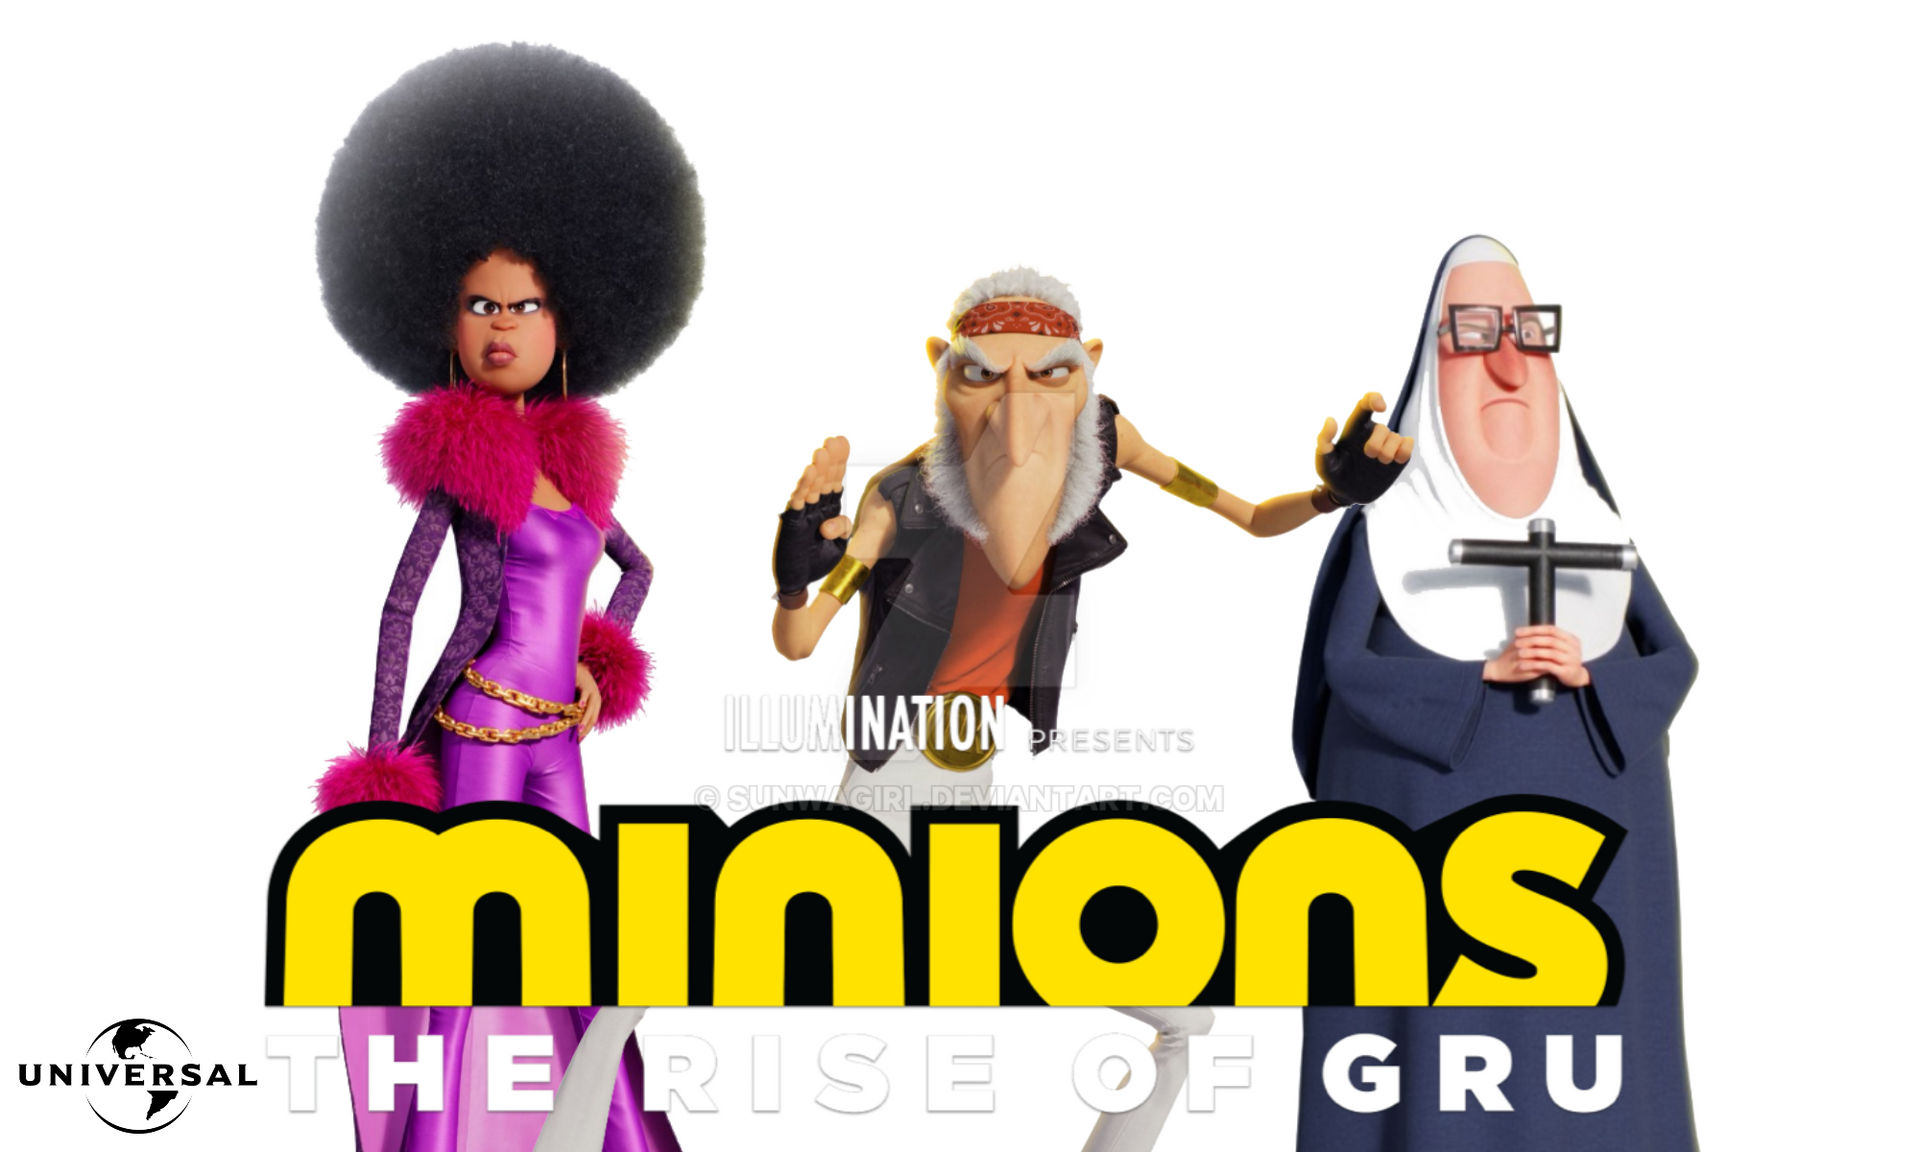 Minions The Rise of Gru - Delayed Meme by SuperMarioFan65 on DeviantArt